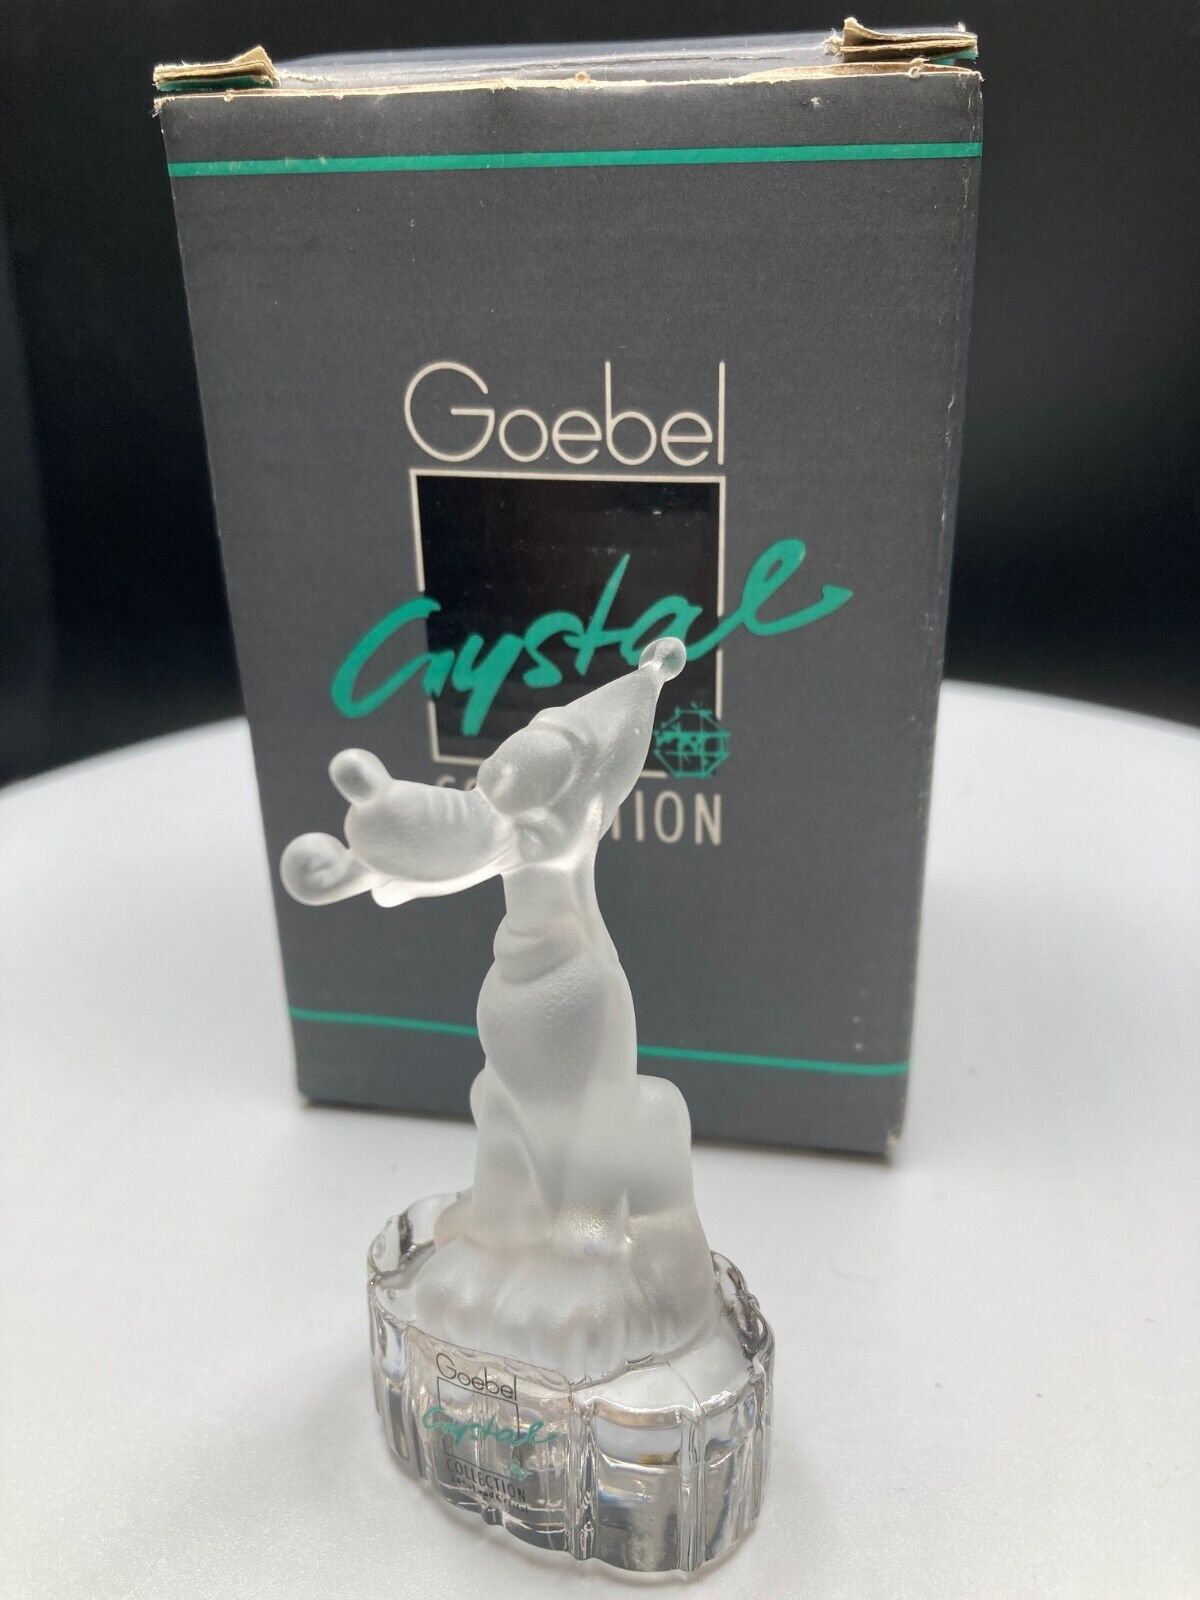 Goebel Germany Crystal Collection Frosted Disney Pluto